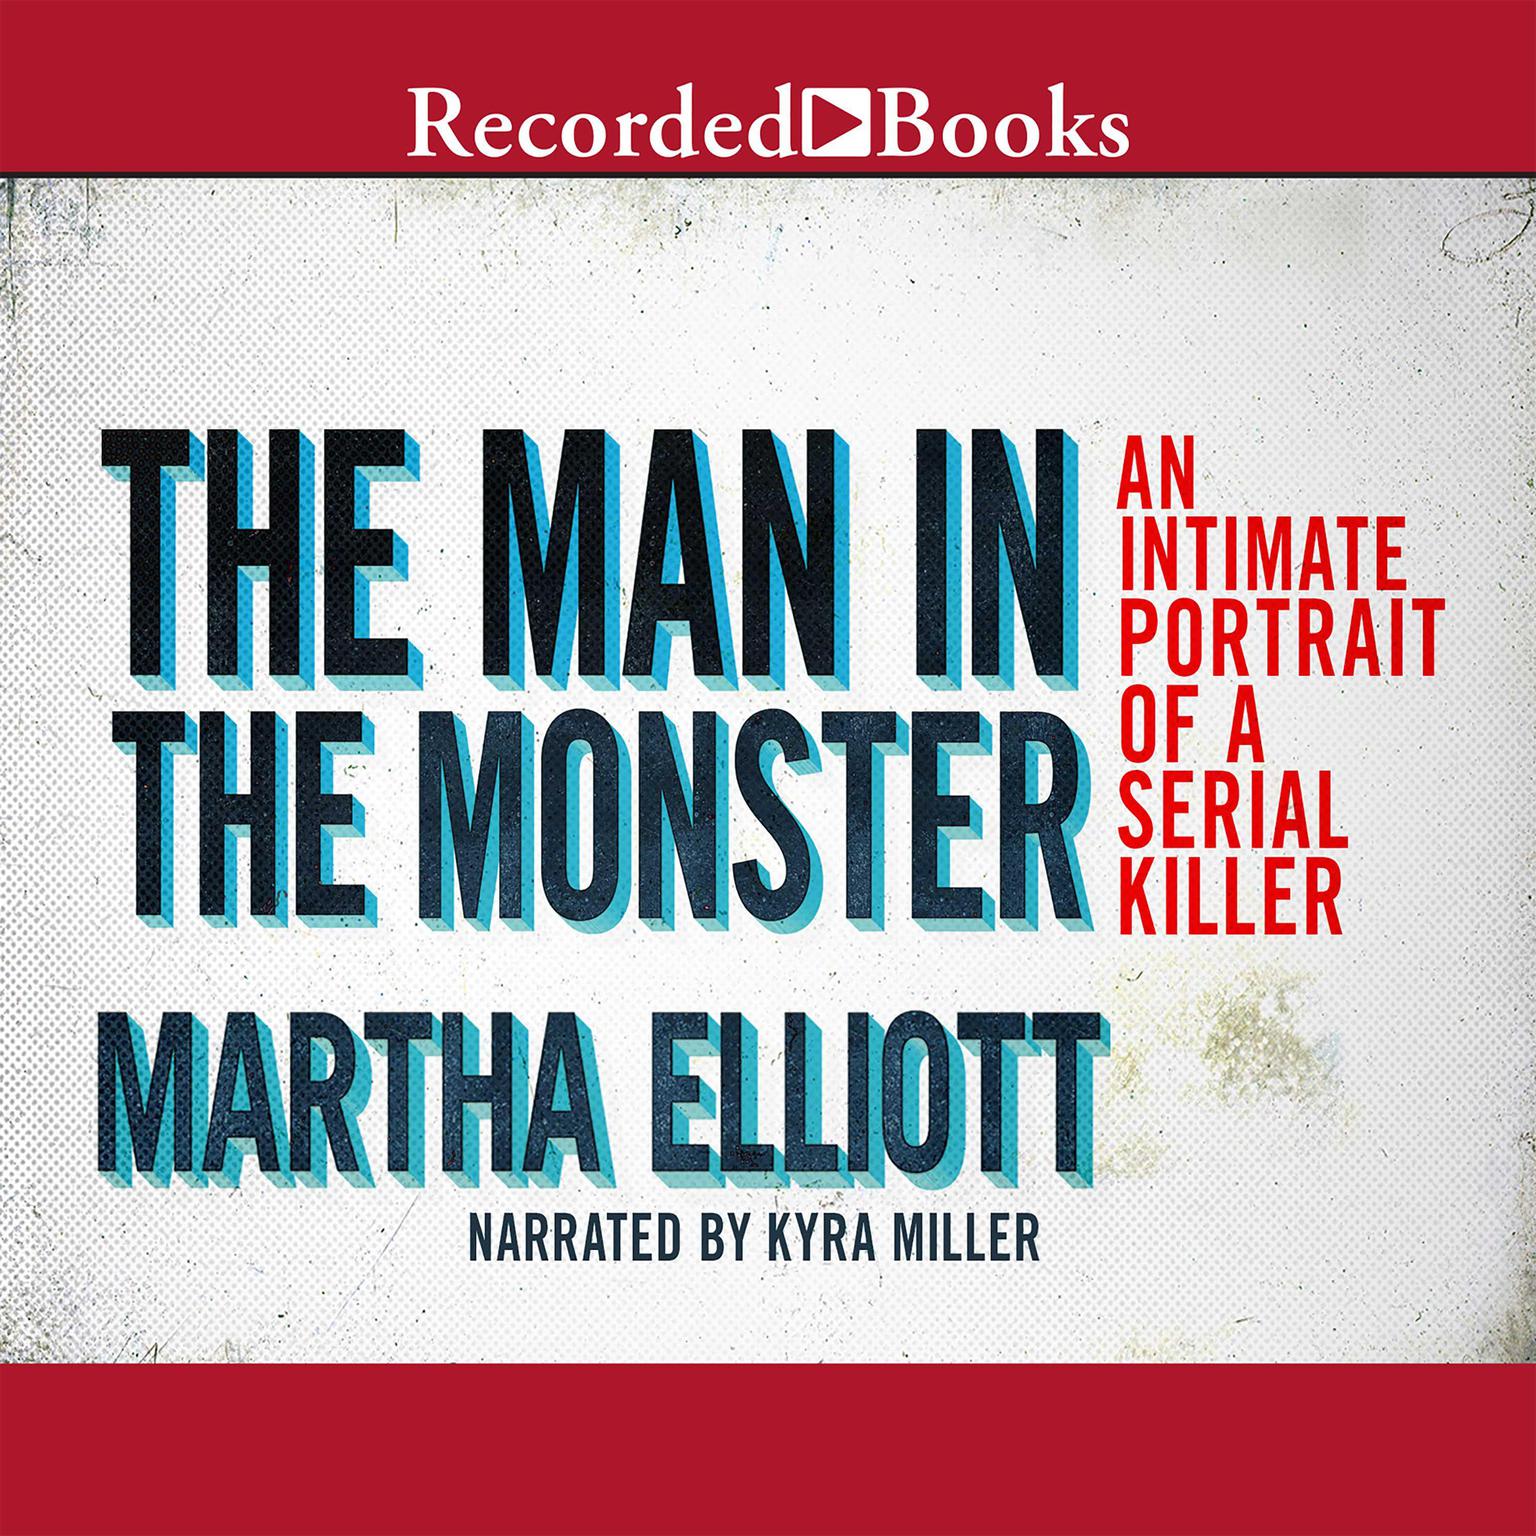 The Man in the Monster: Inside the Mind of a Serial Killer Audiobook, by Martha Elliott